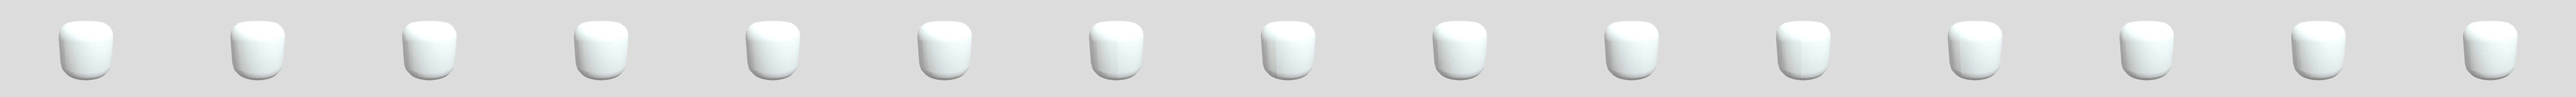 Roblox Head For Blender Download Free 3d Model By Devonysylvester Devonysylvester 9751117 - solid modelling roblox download